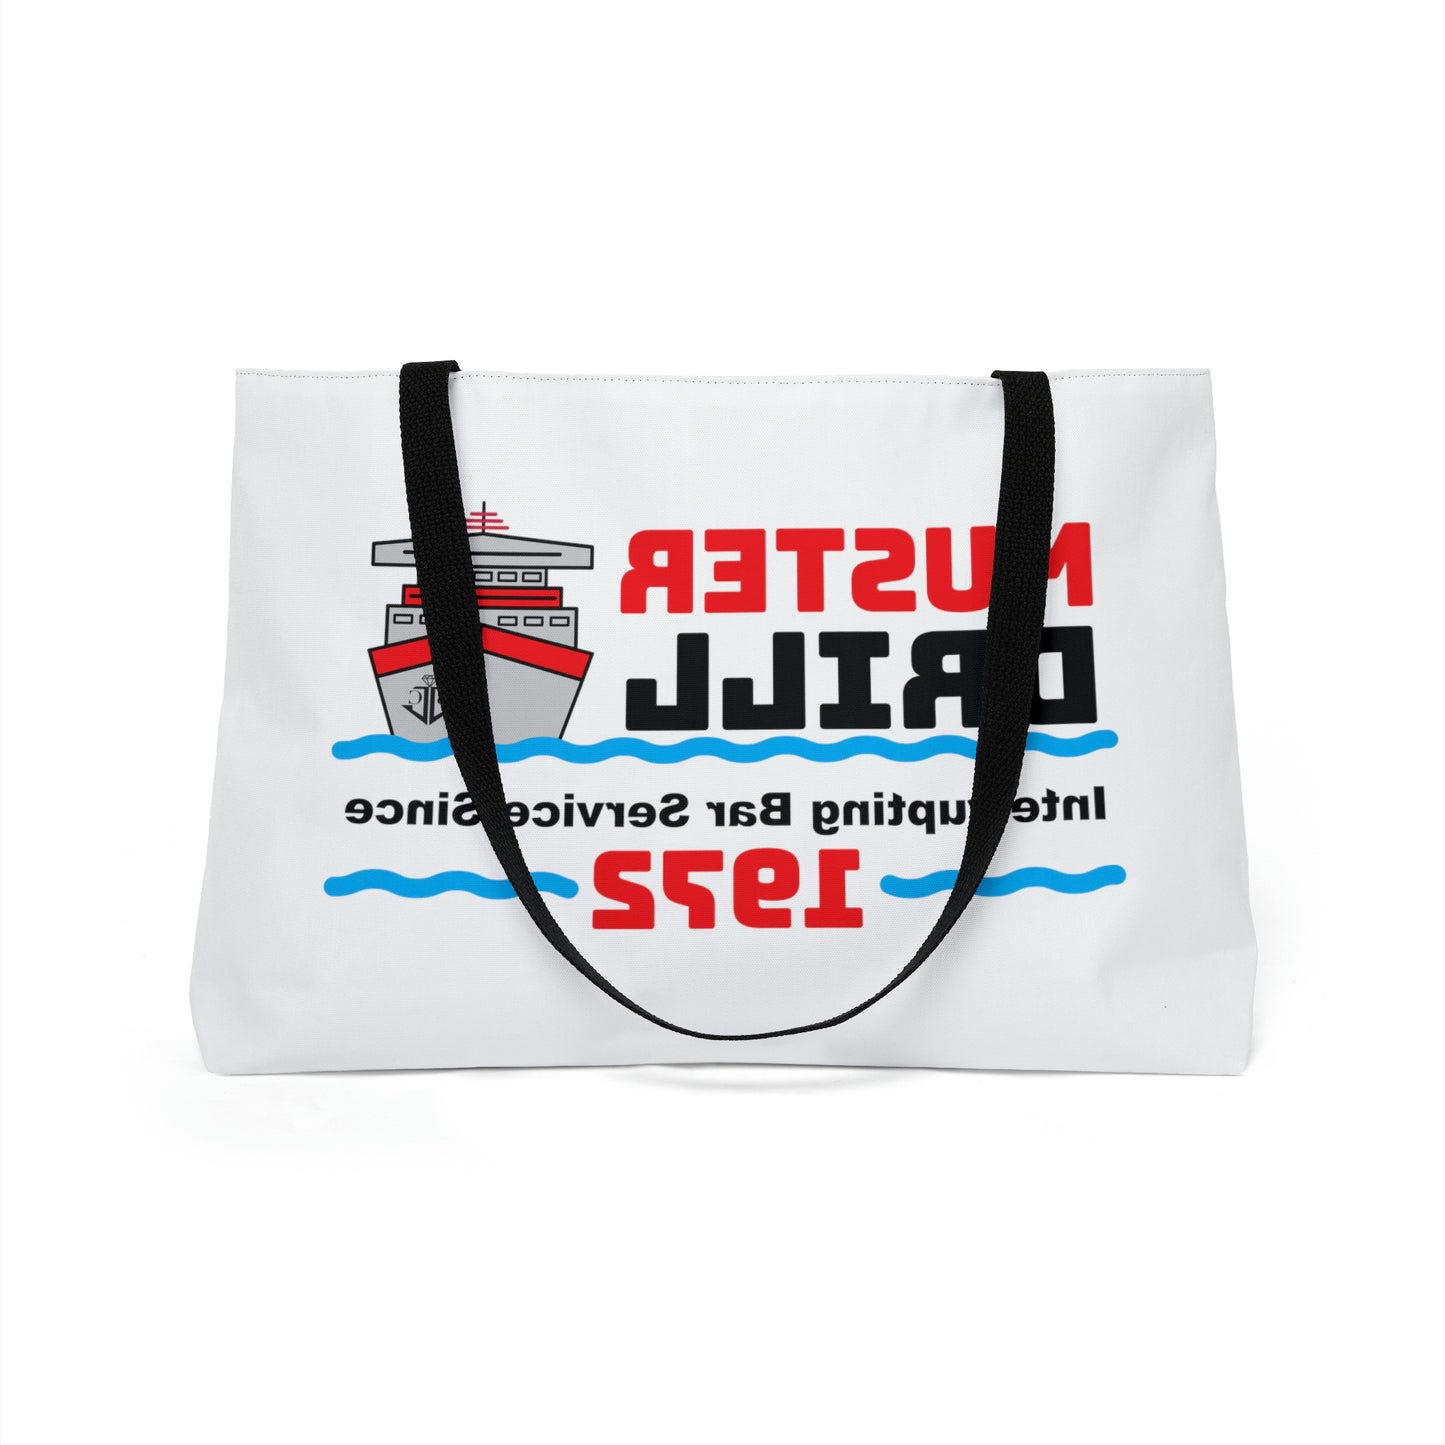 Muster Drill Interrupting Bar Service Since 1972-Weekender Tote Bag